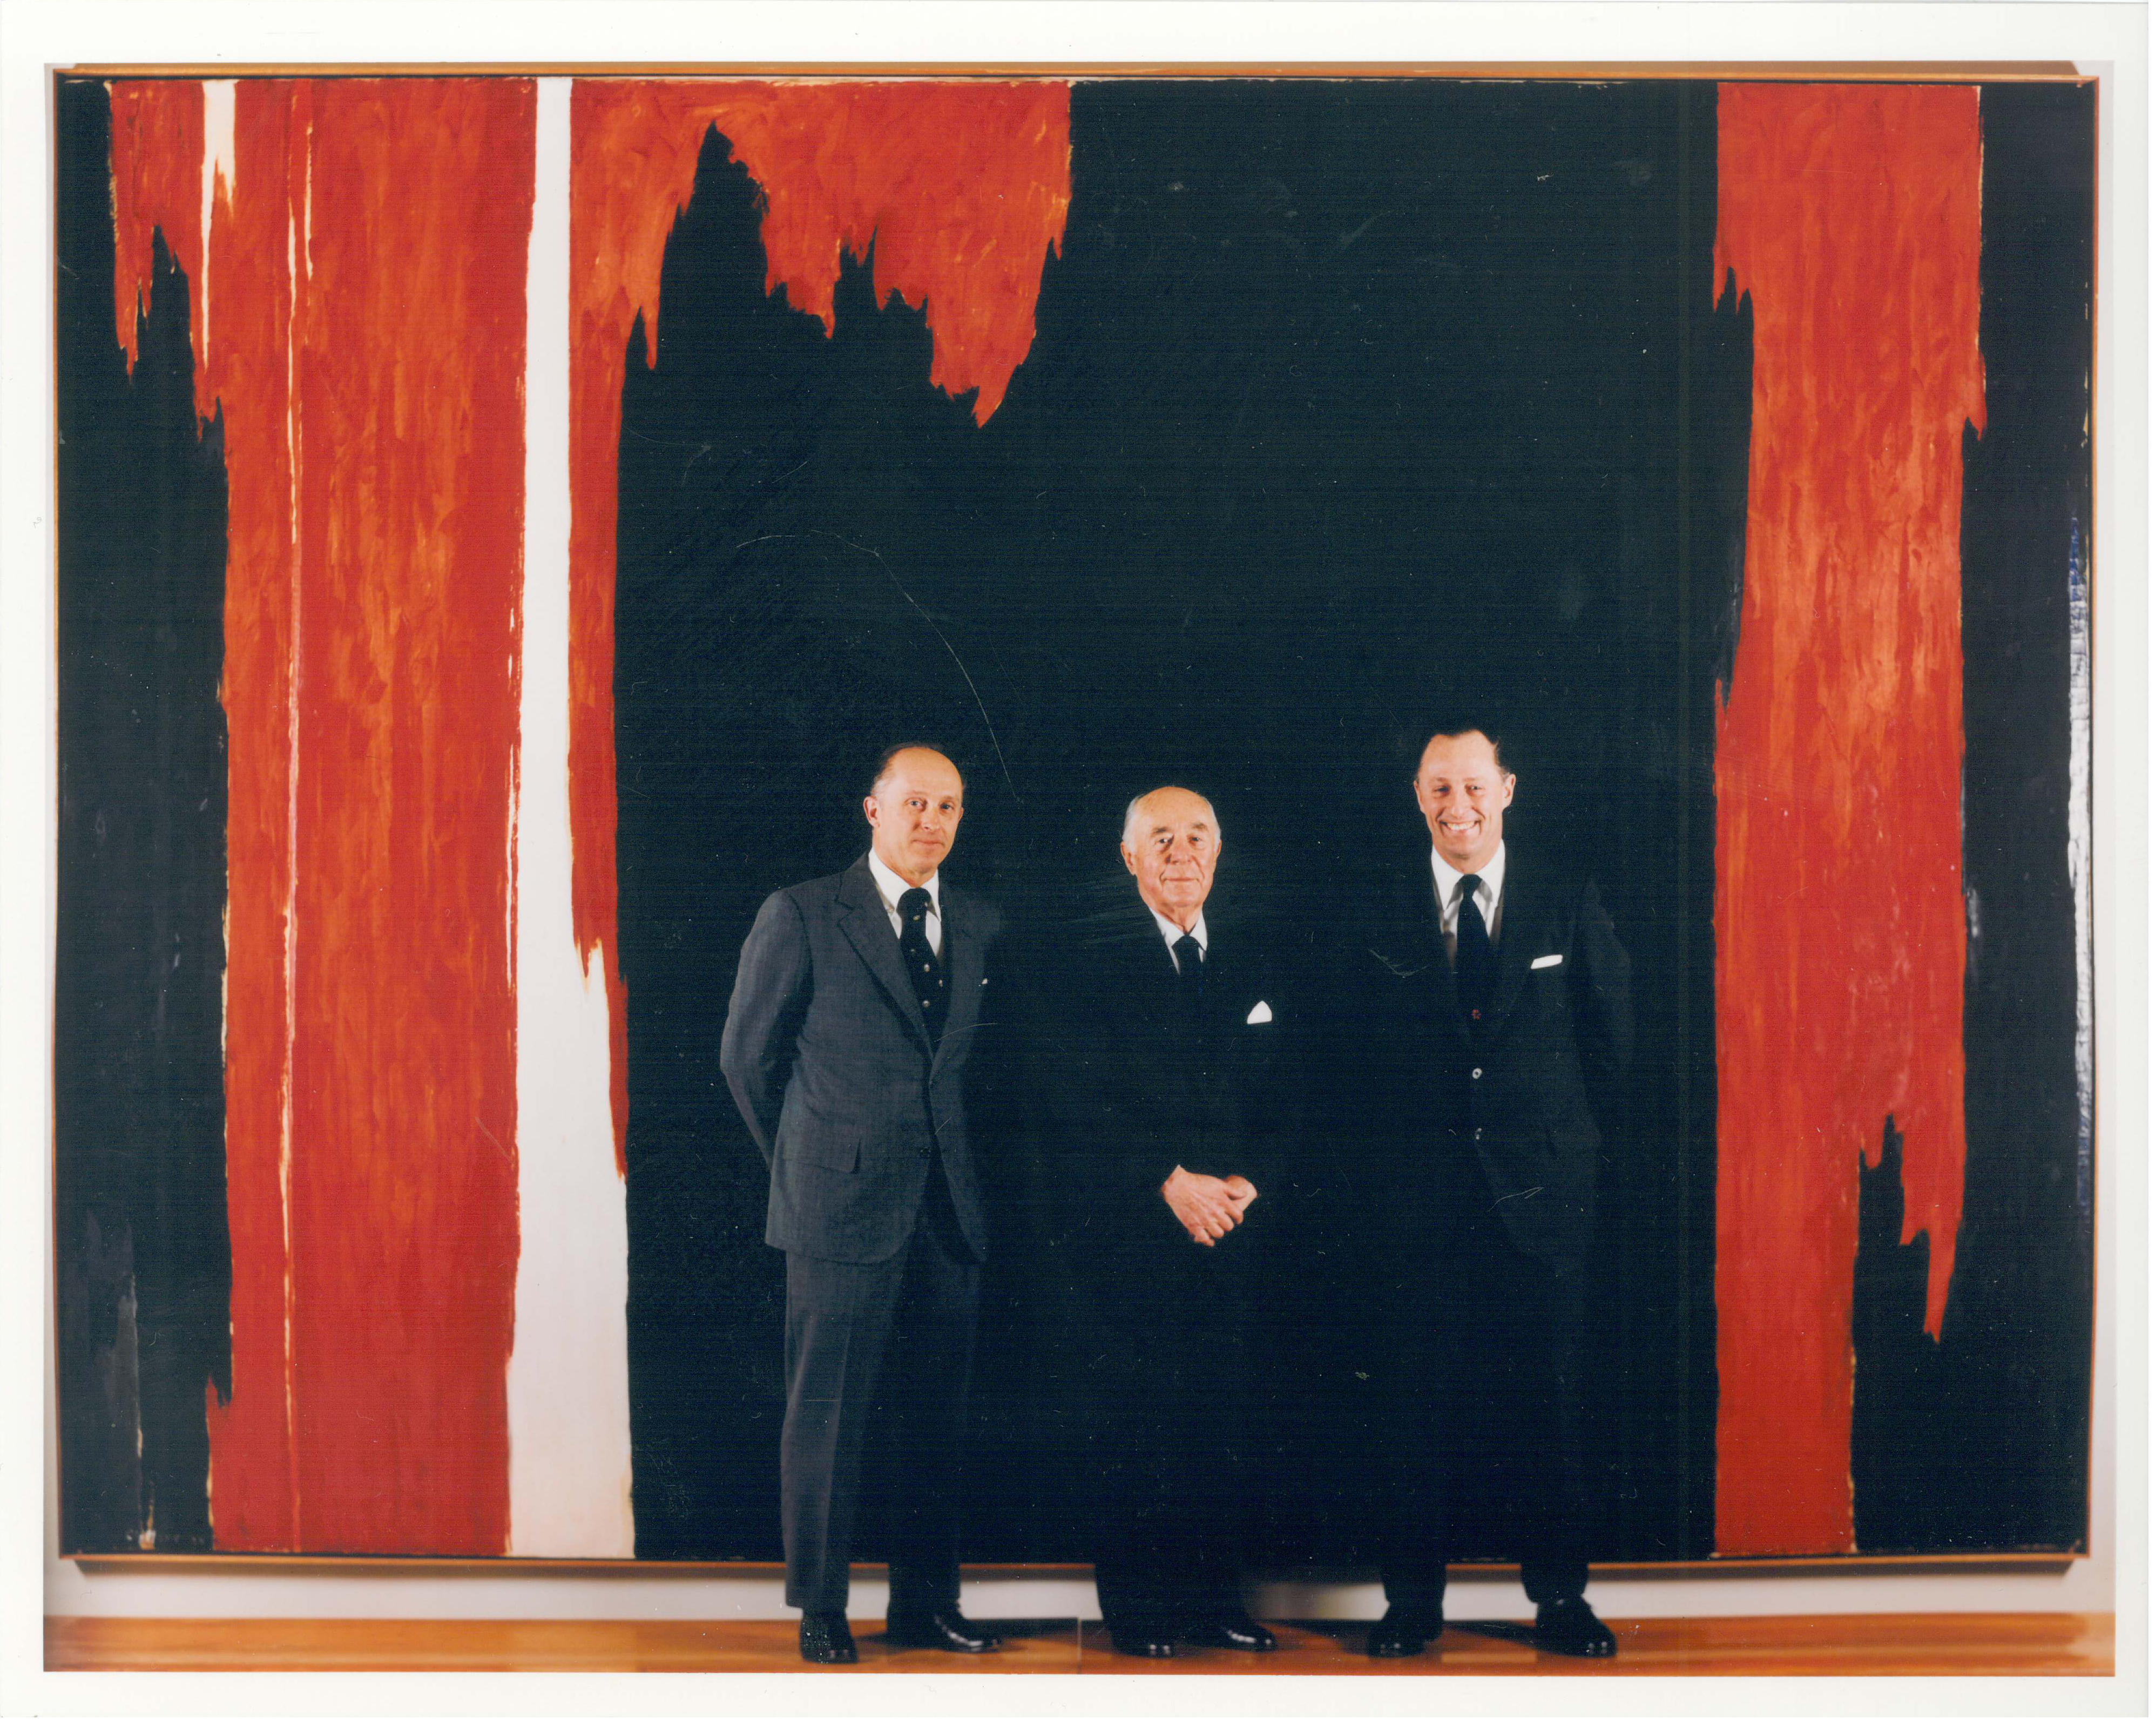 Northrup R. Knox, Seymour H. Knox, Jr., and Seymour H. Knox III in front of Clyfford Still’s PH-49 (1954), 1954